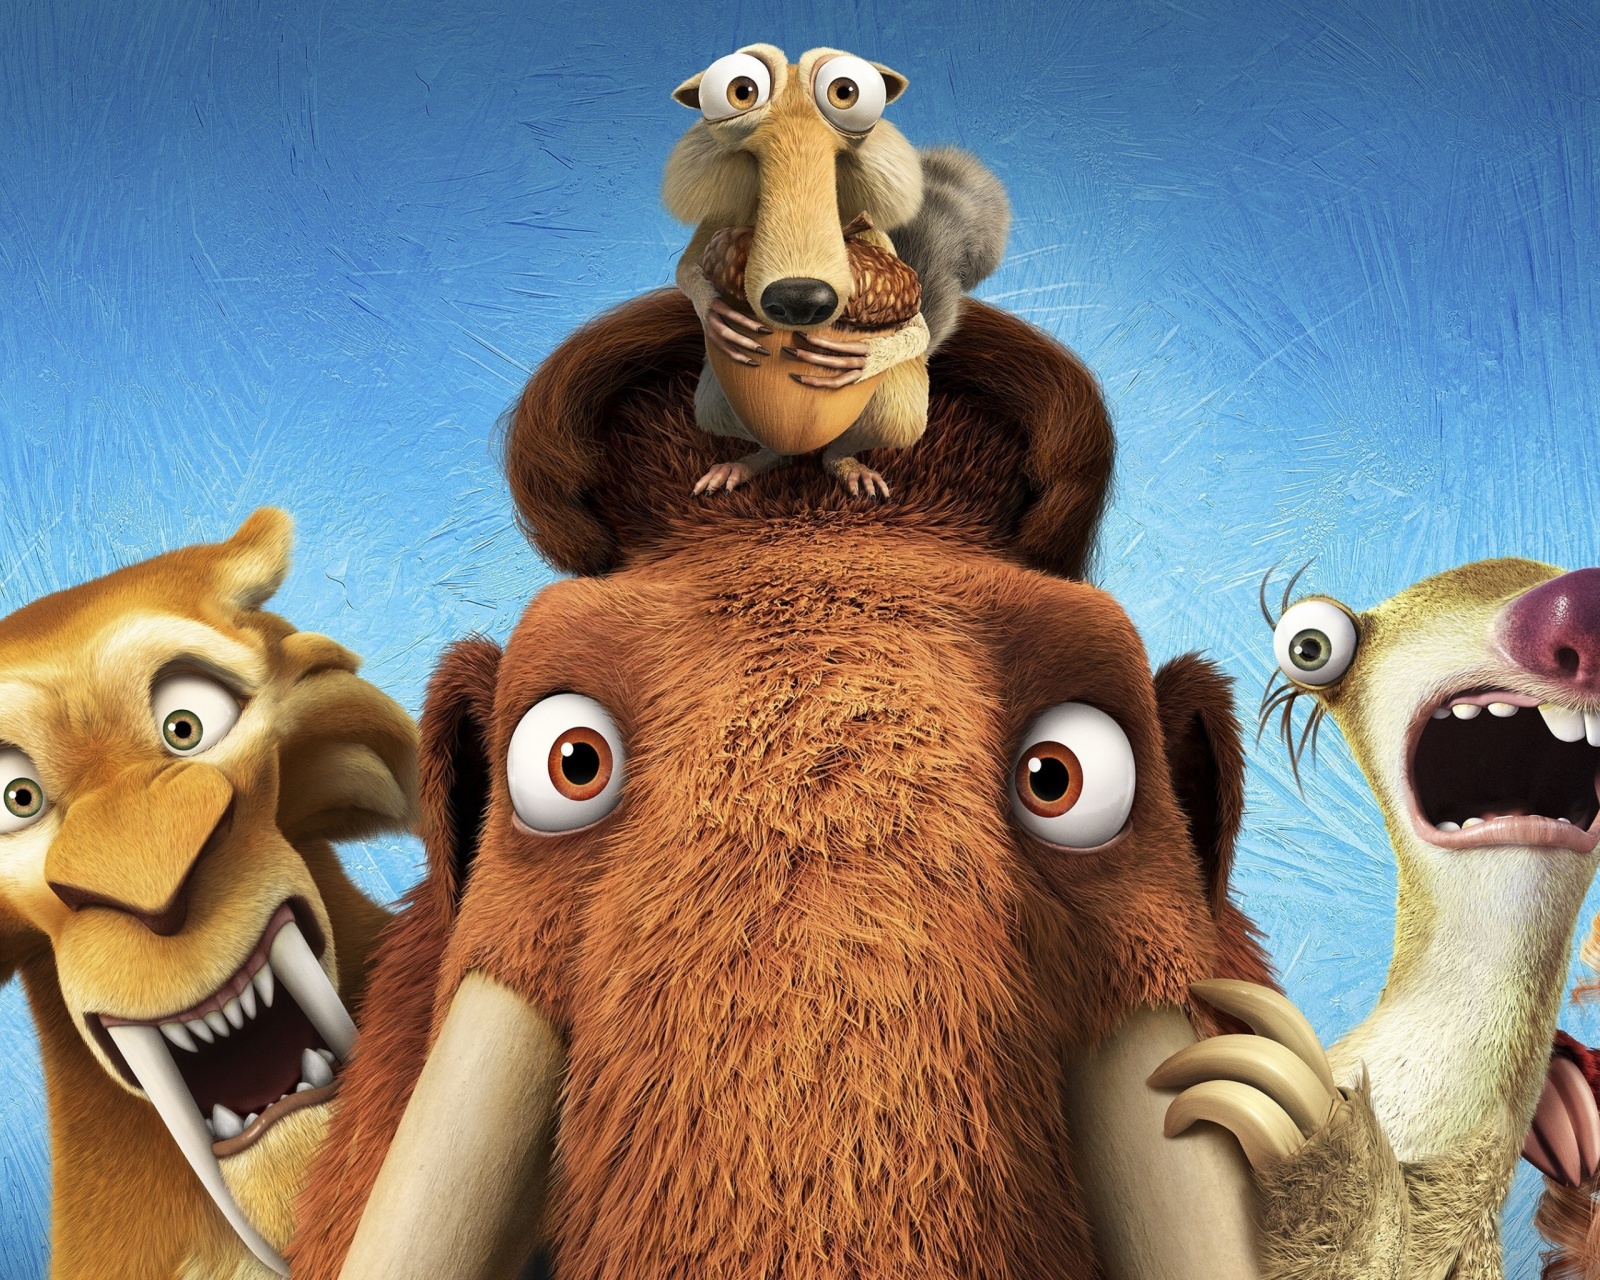 Ice Age 5 Collision Course with Diego, Manny, Scrat, Sid, Mammoths screenshot #1 1600x1280